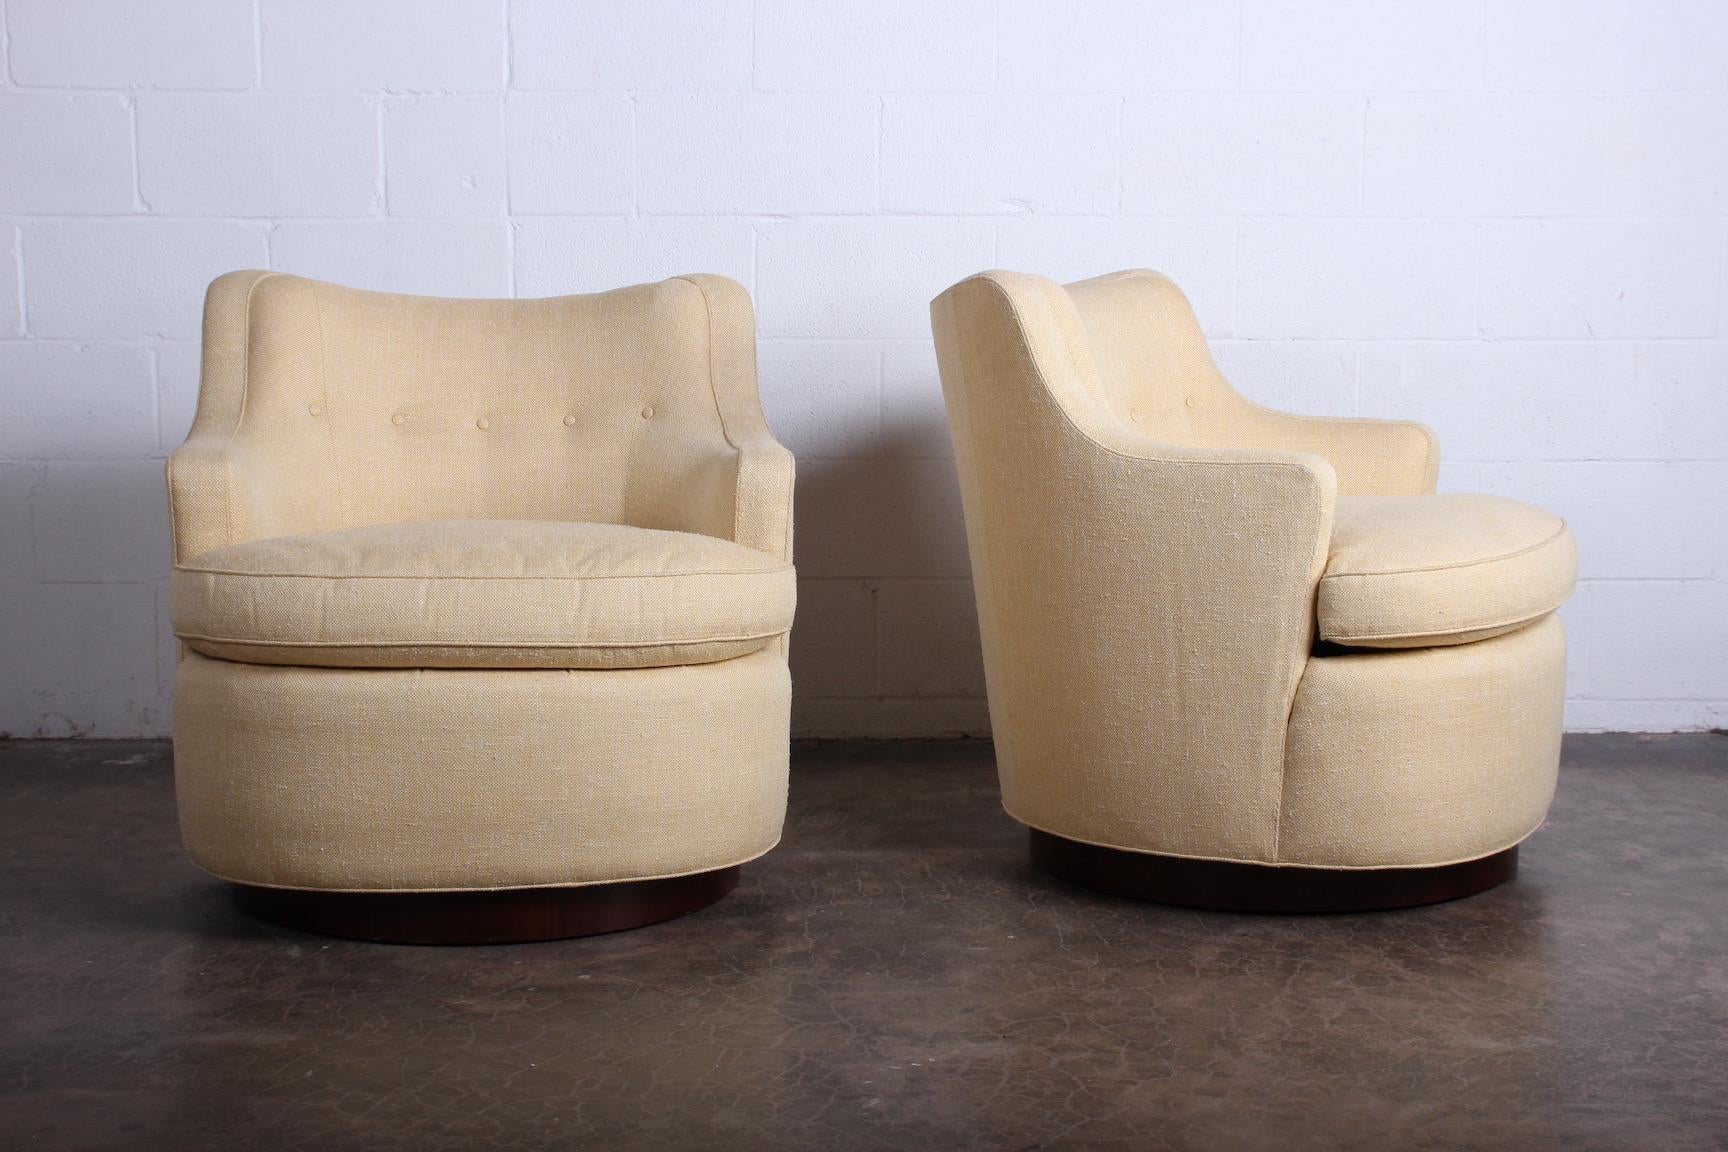 A pair of large scale swivel chairs on mahogany bases designed by Edward Wormley for Dunbar. Fully restored with down cushions and upholstered in Cowtan and Tout cotton in a neutral straw yellow weave.